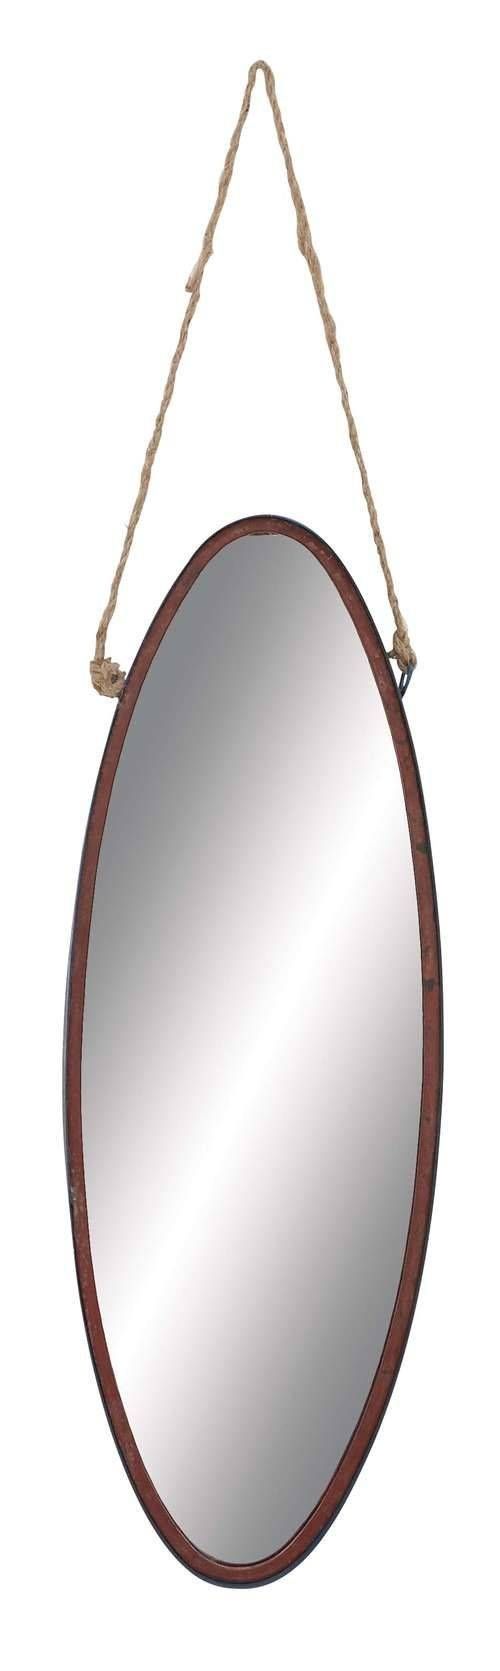 118 Best Mirrors Images On Pinterest | Wall Mirrors, Floor Mirrors Pertaining To Leather Wall Mirrors (View 22 of 25)